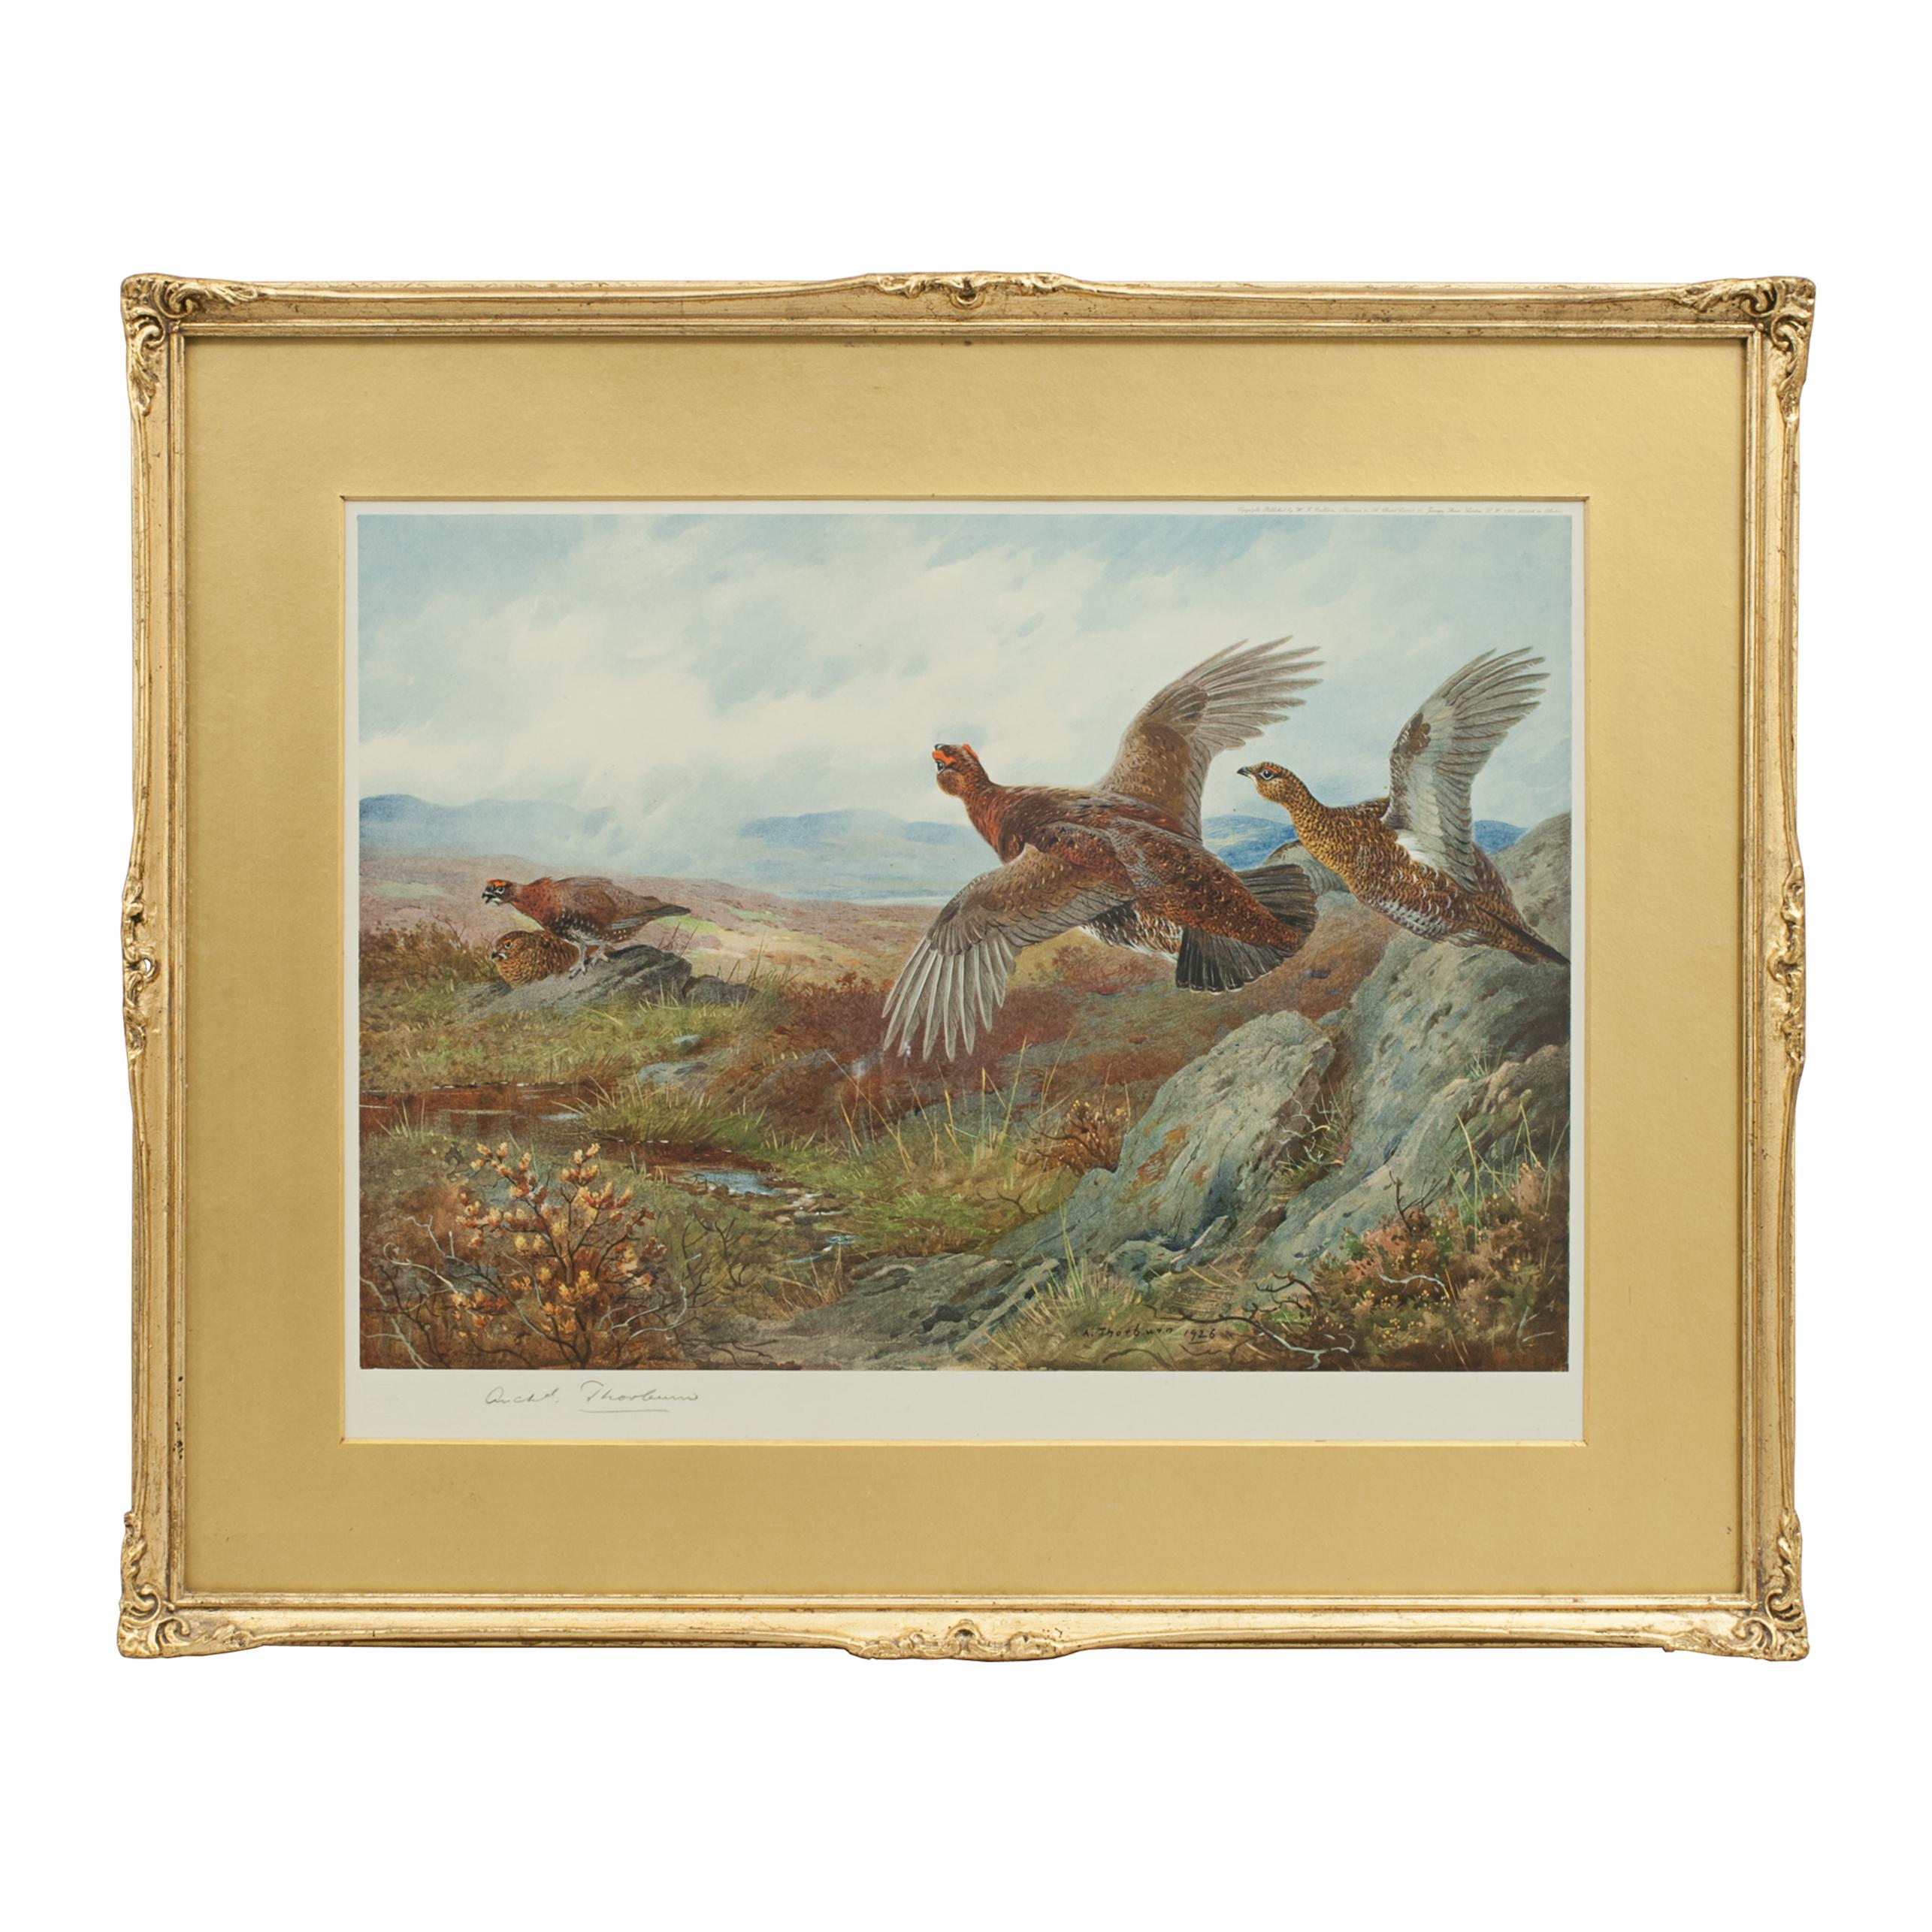 Antique Shooting Picture Game Birds by Archibald Thorburn 1927